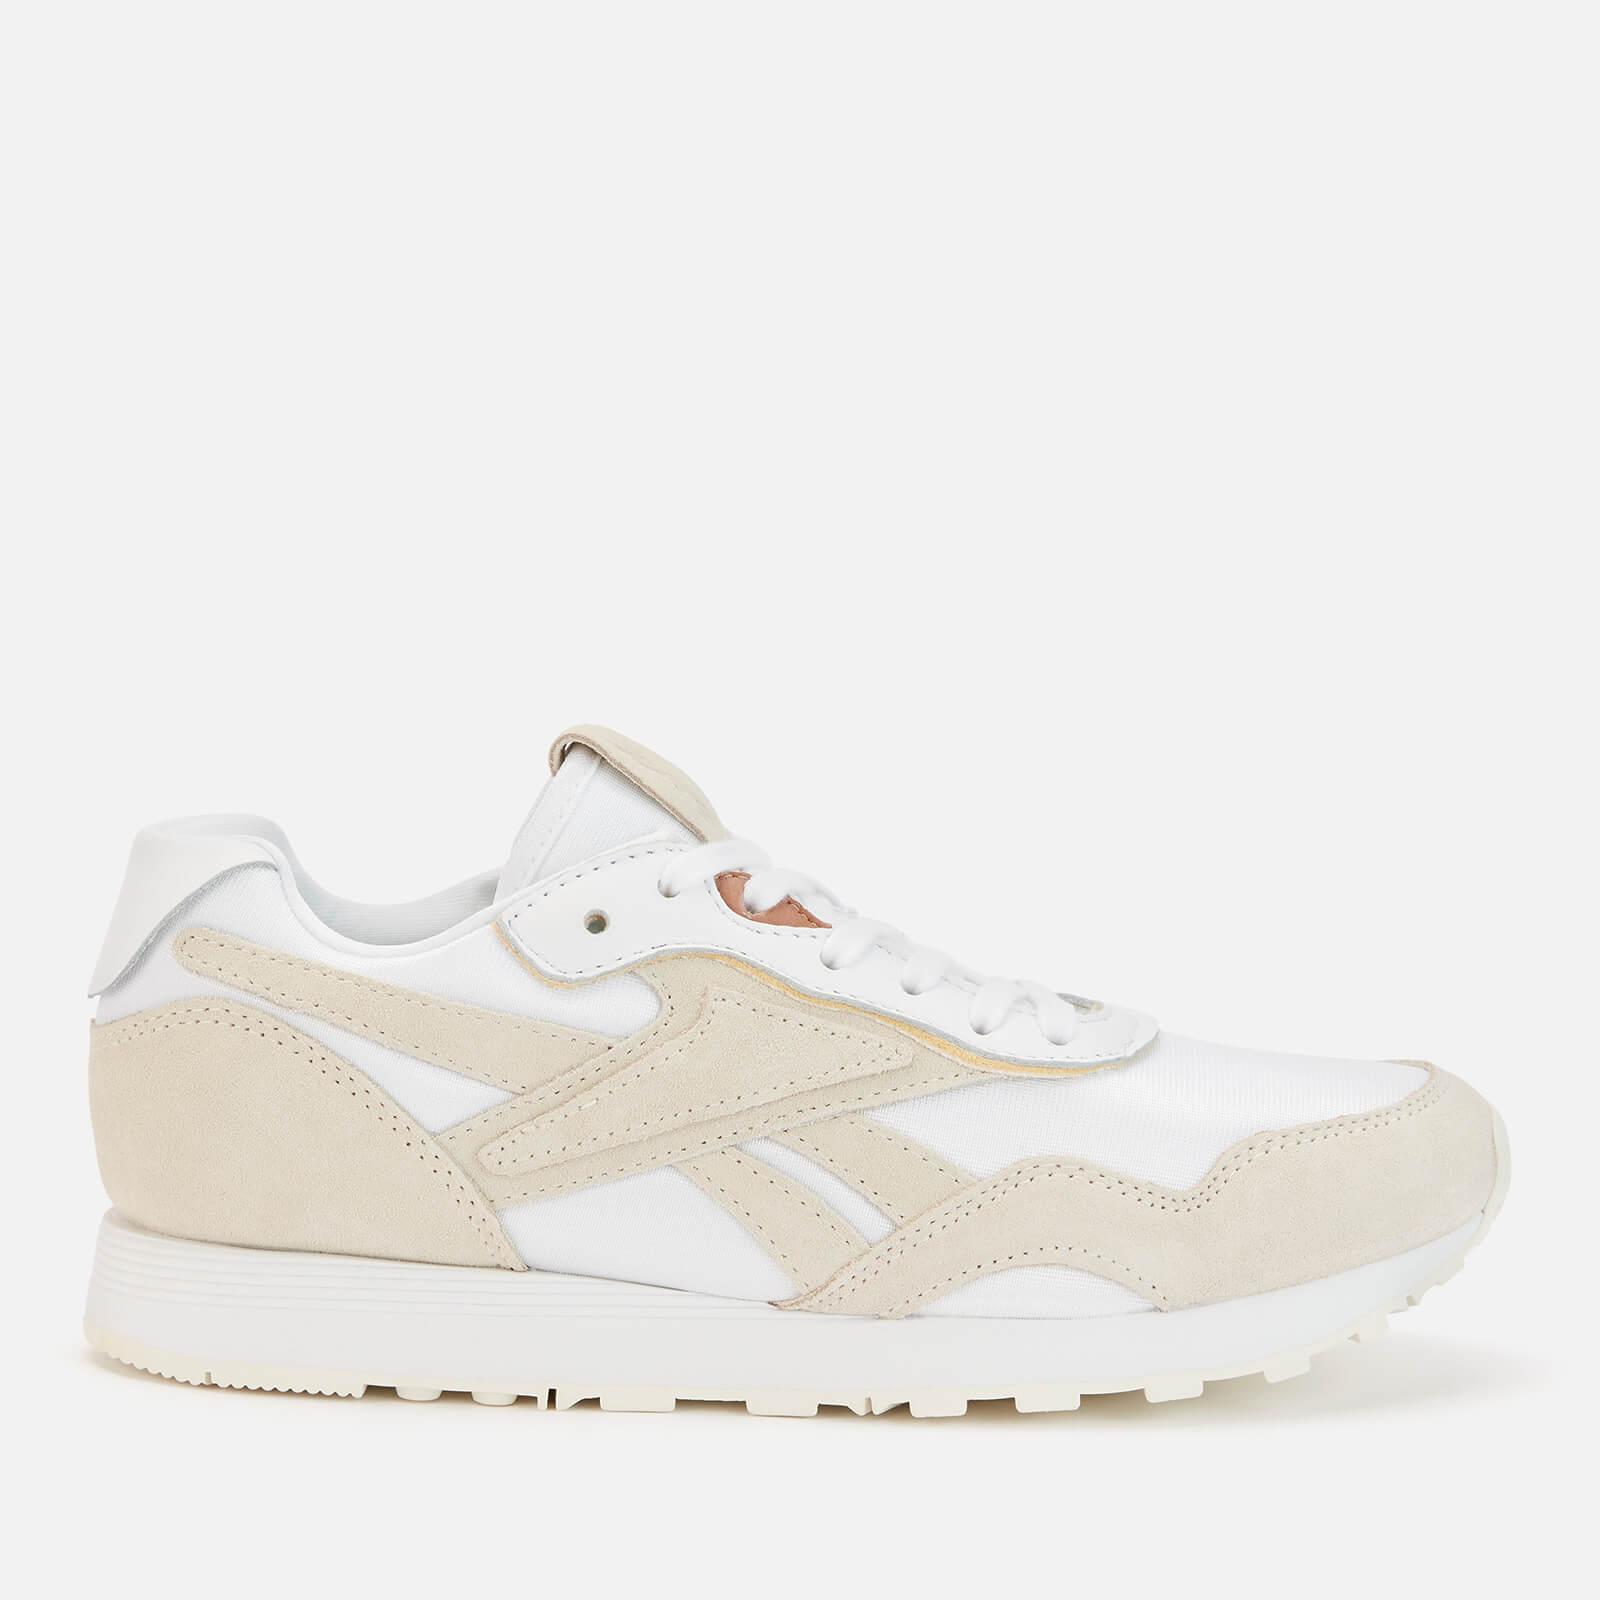 Reebok X Victoria Beckham Synthetic Rapide Trainers in White - Lyst